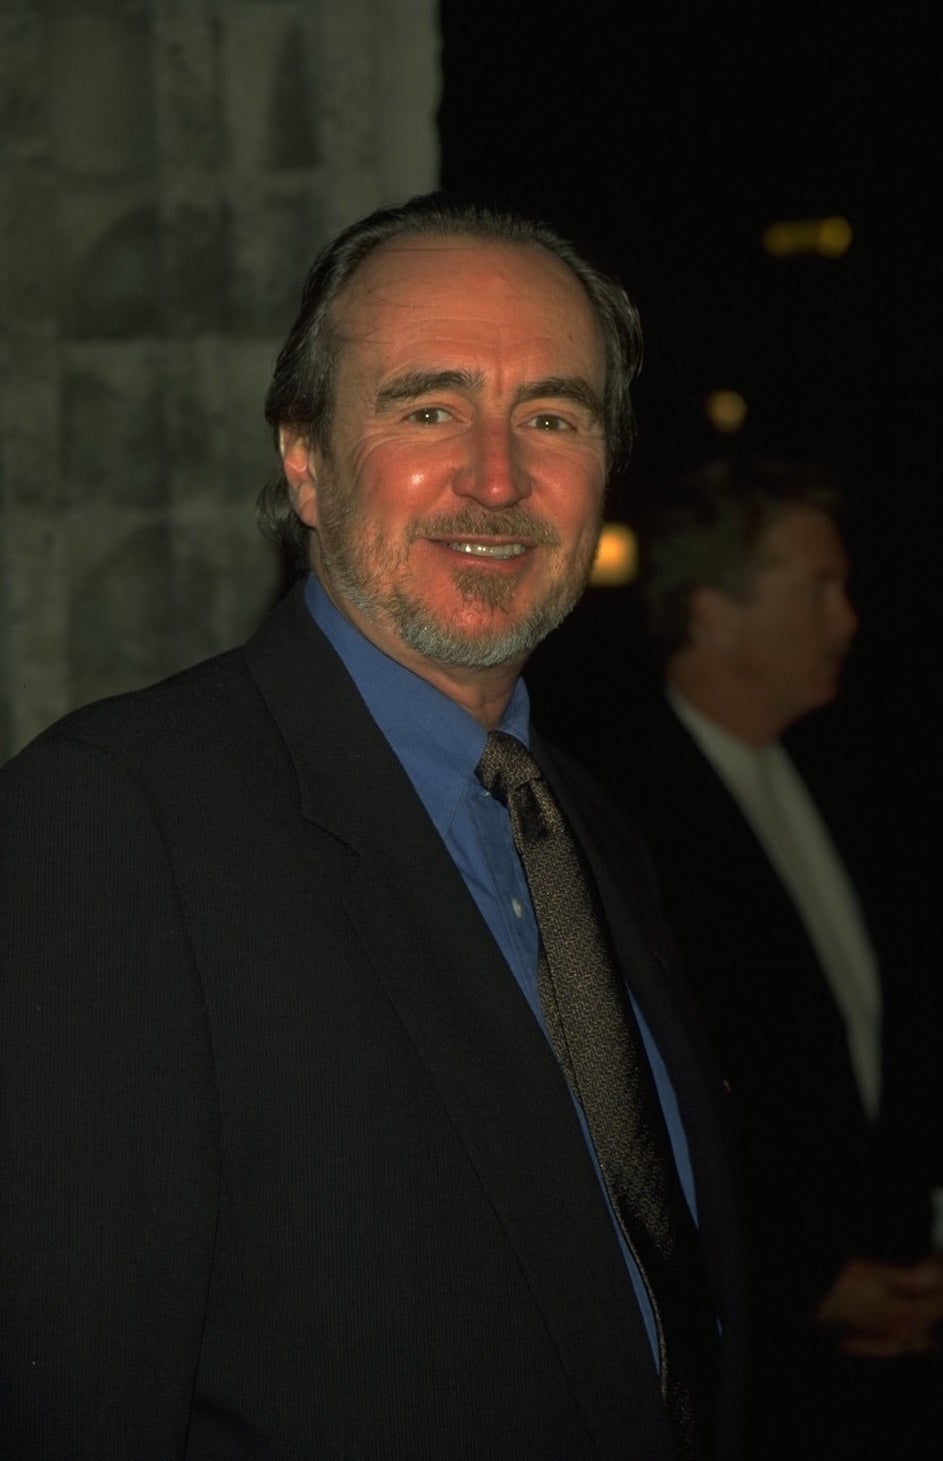 Wes Craven in a black suit with a blue shirt and black tie